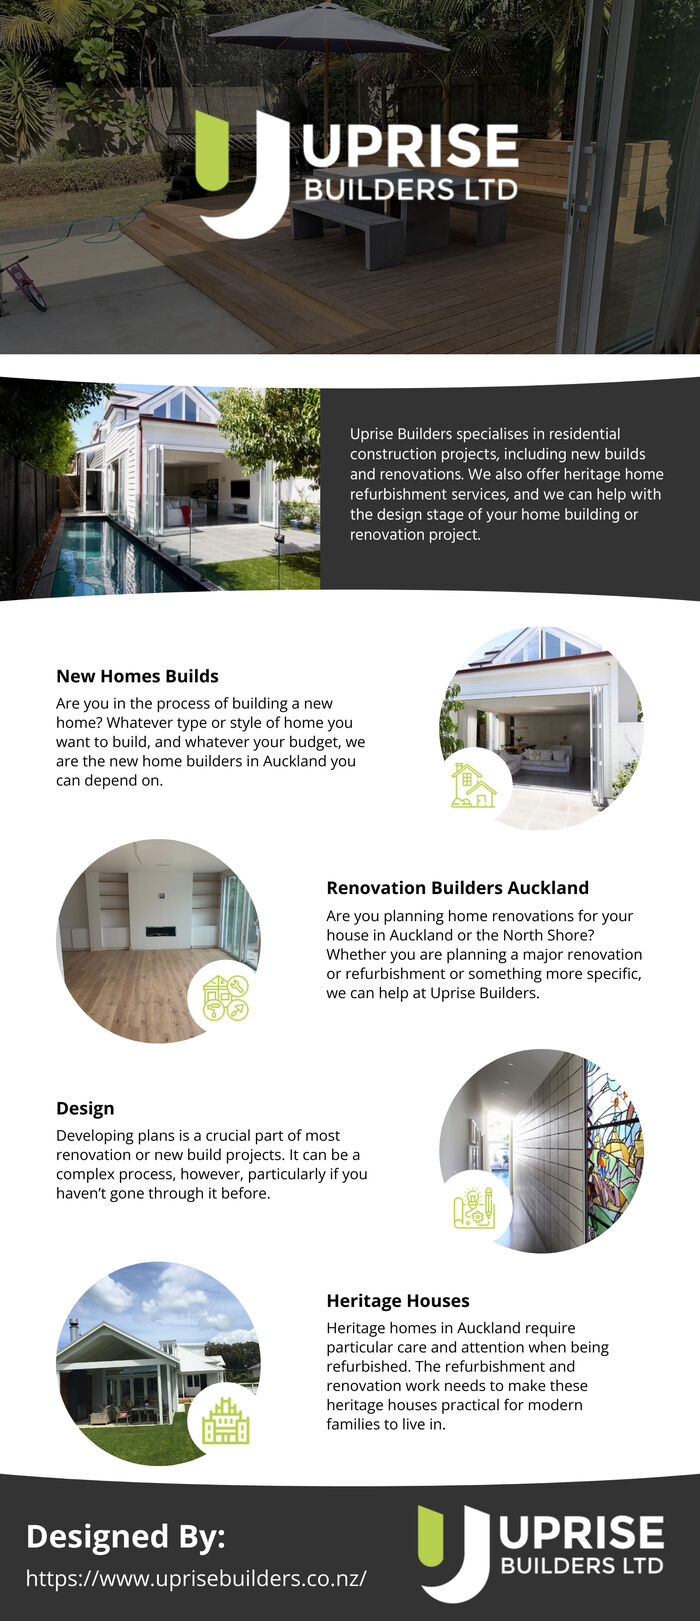 This Infographic is designed by Uprise Builders Ltd